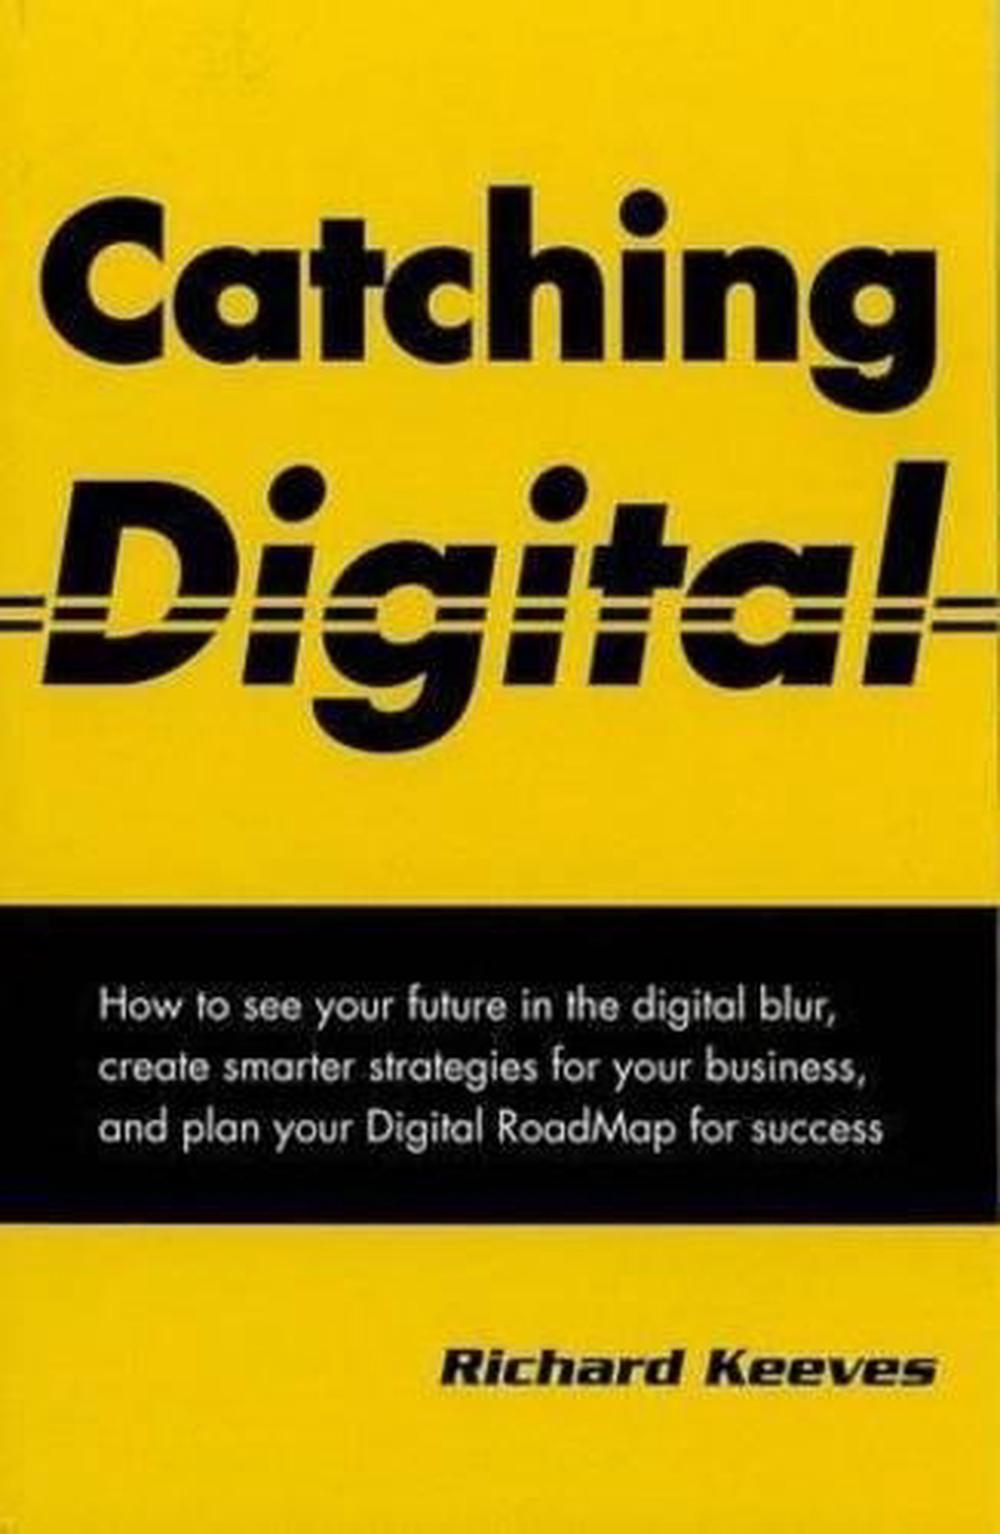 The　at　Richard　Keeves,　Digital　online　Buy　9780980822625　Nile　A.　by　Catching　Paperback,